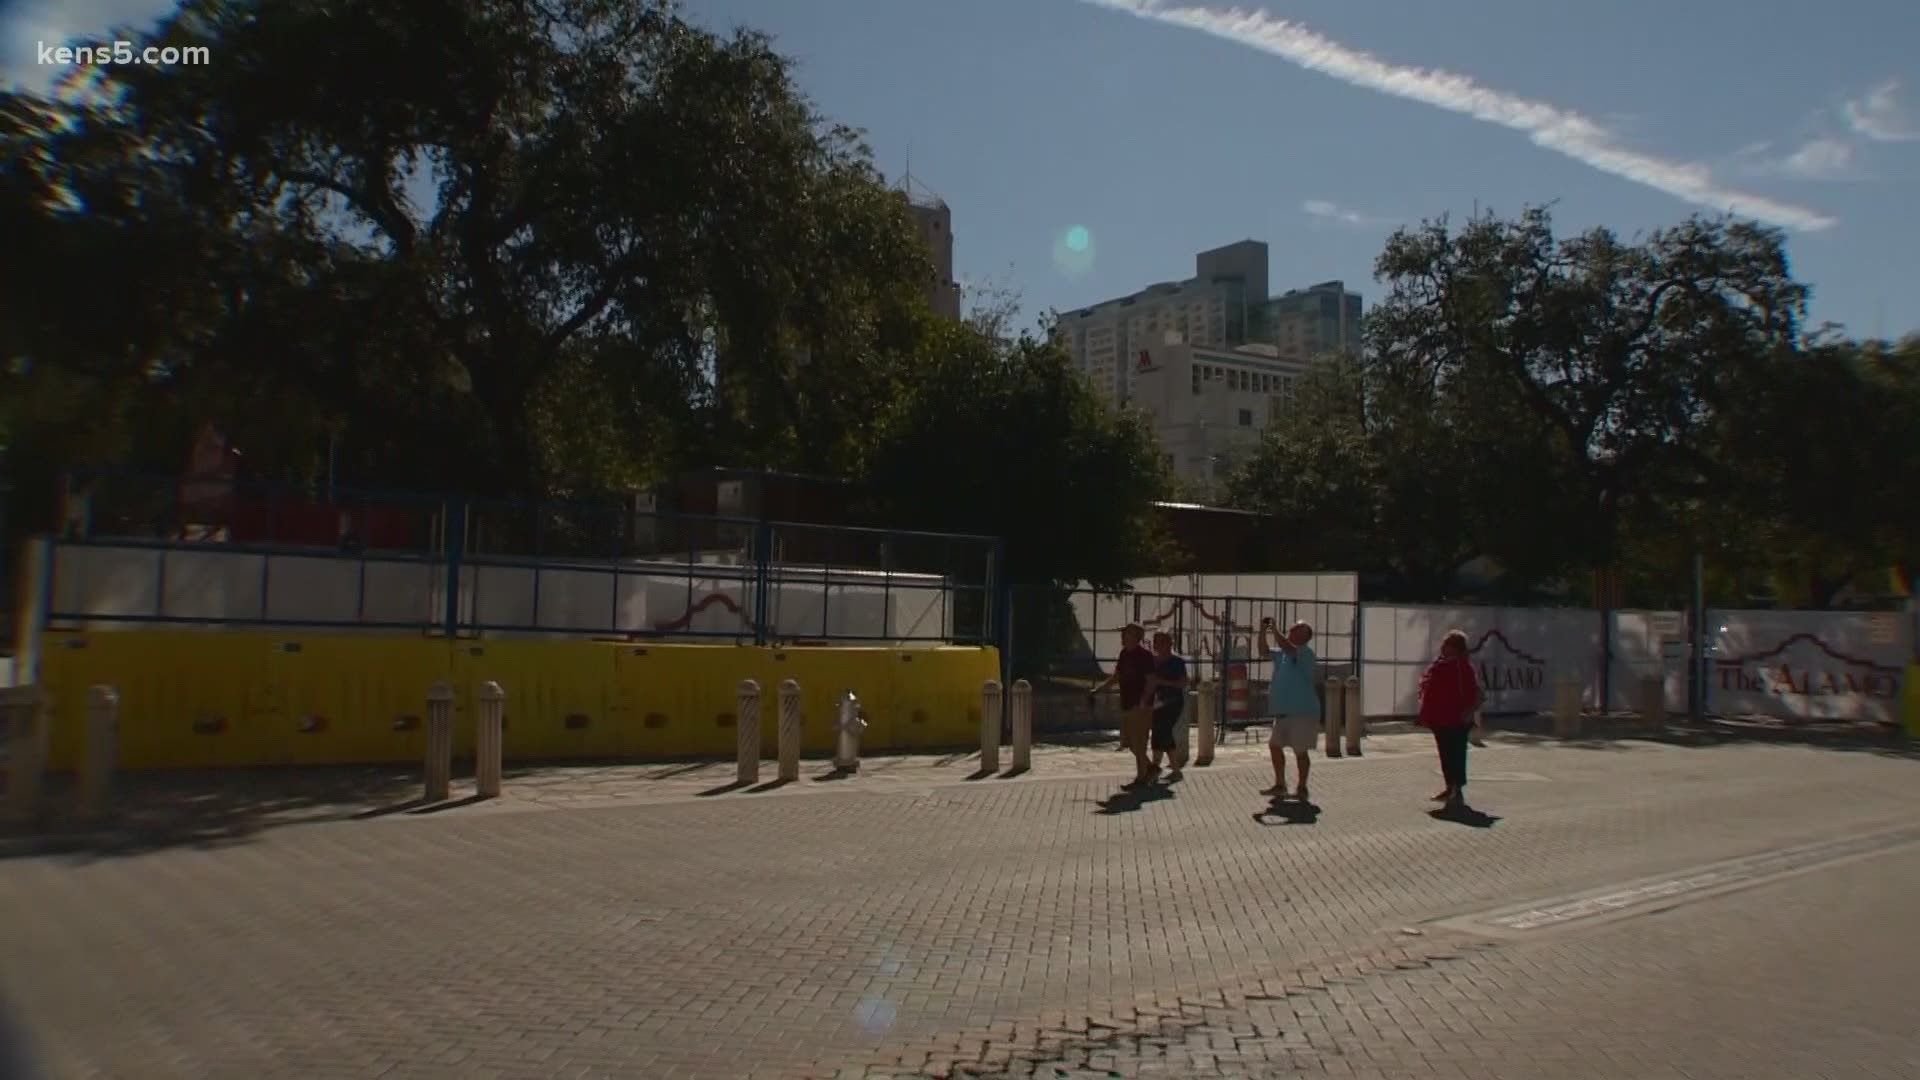 The City will add the temporary fencing around the perimeter of Alamo Plaza, though officials say there is no data on a potential threat.